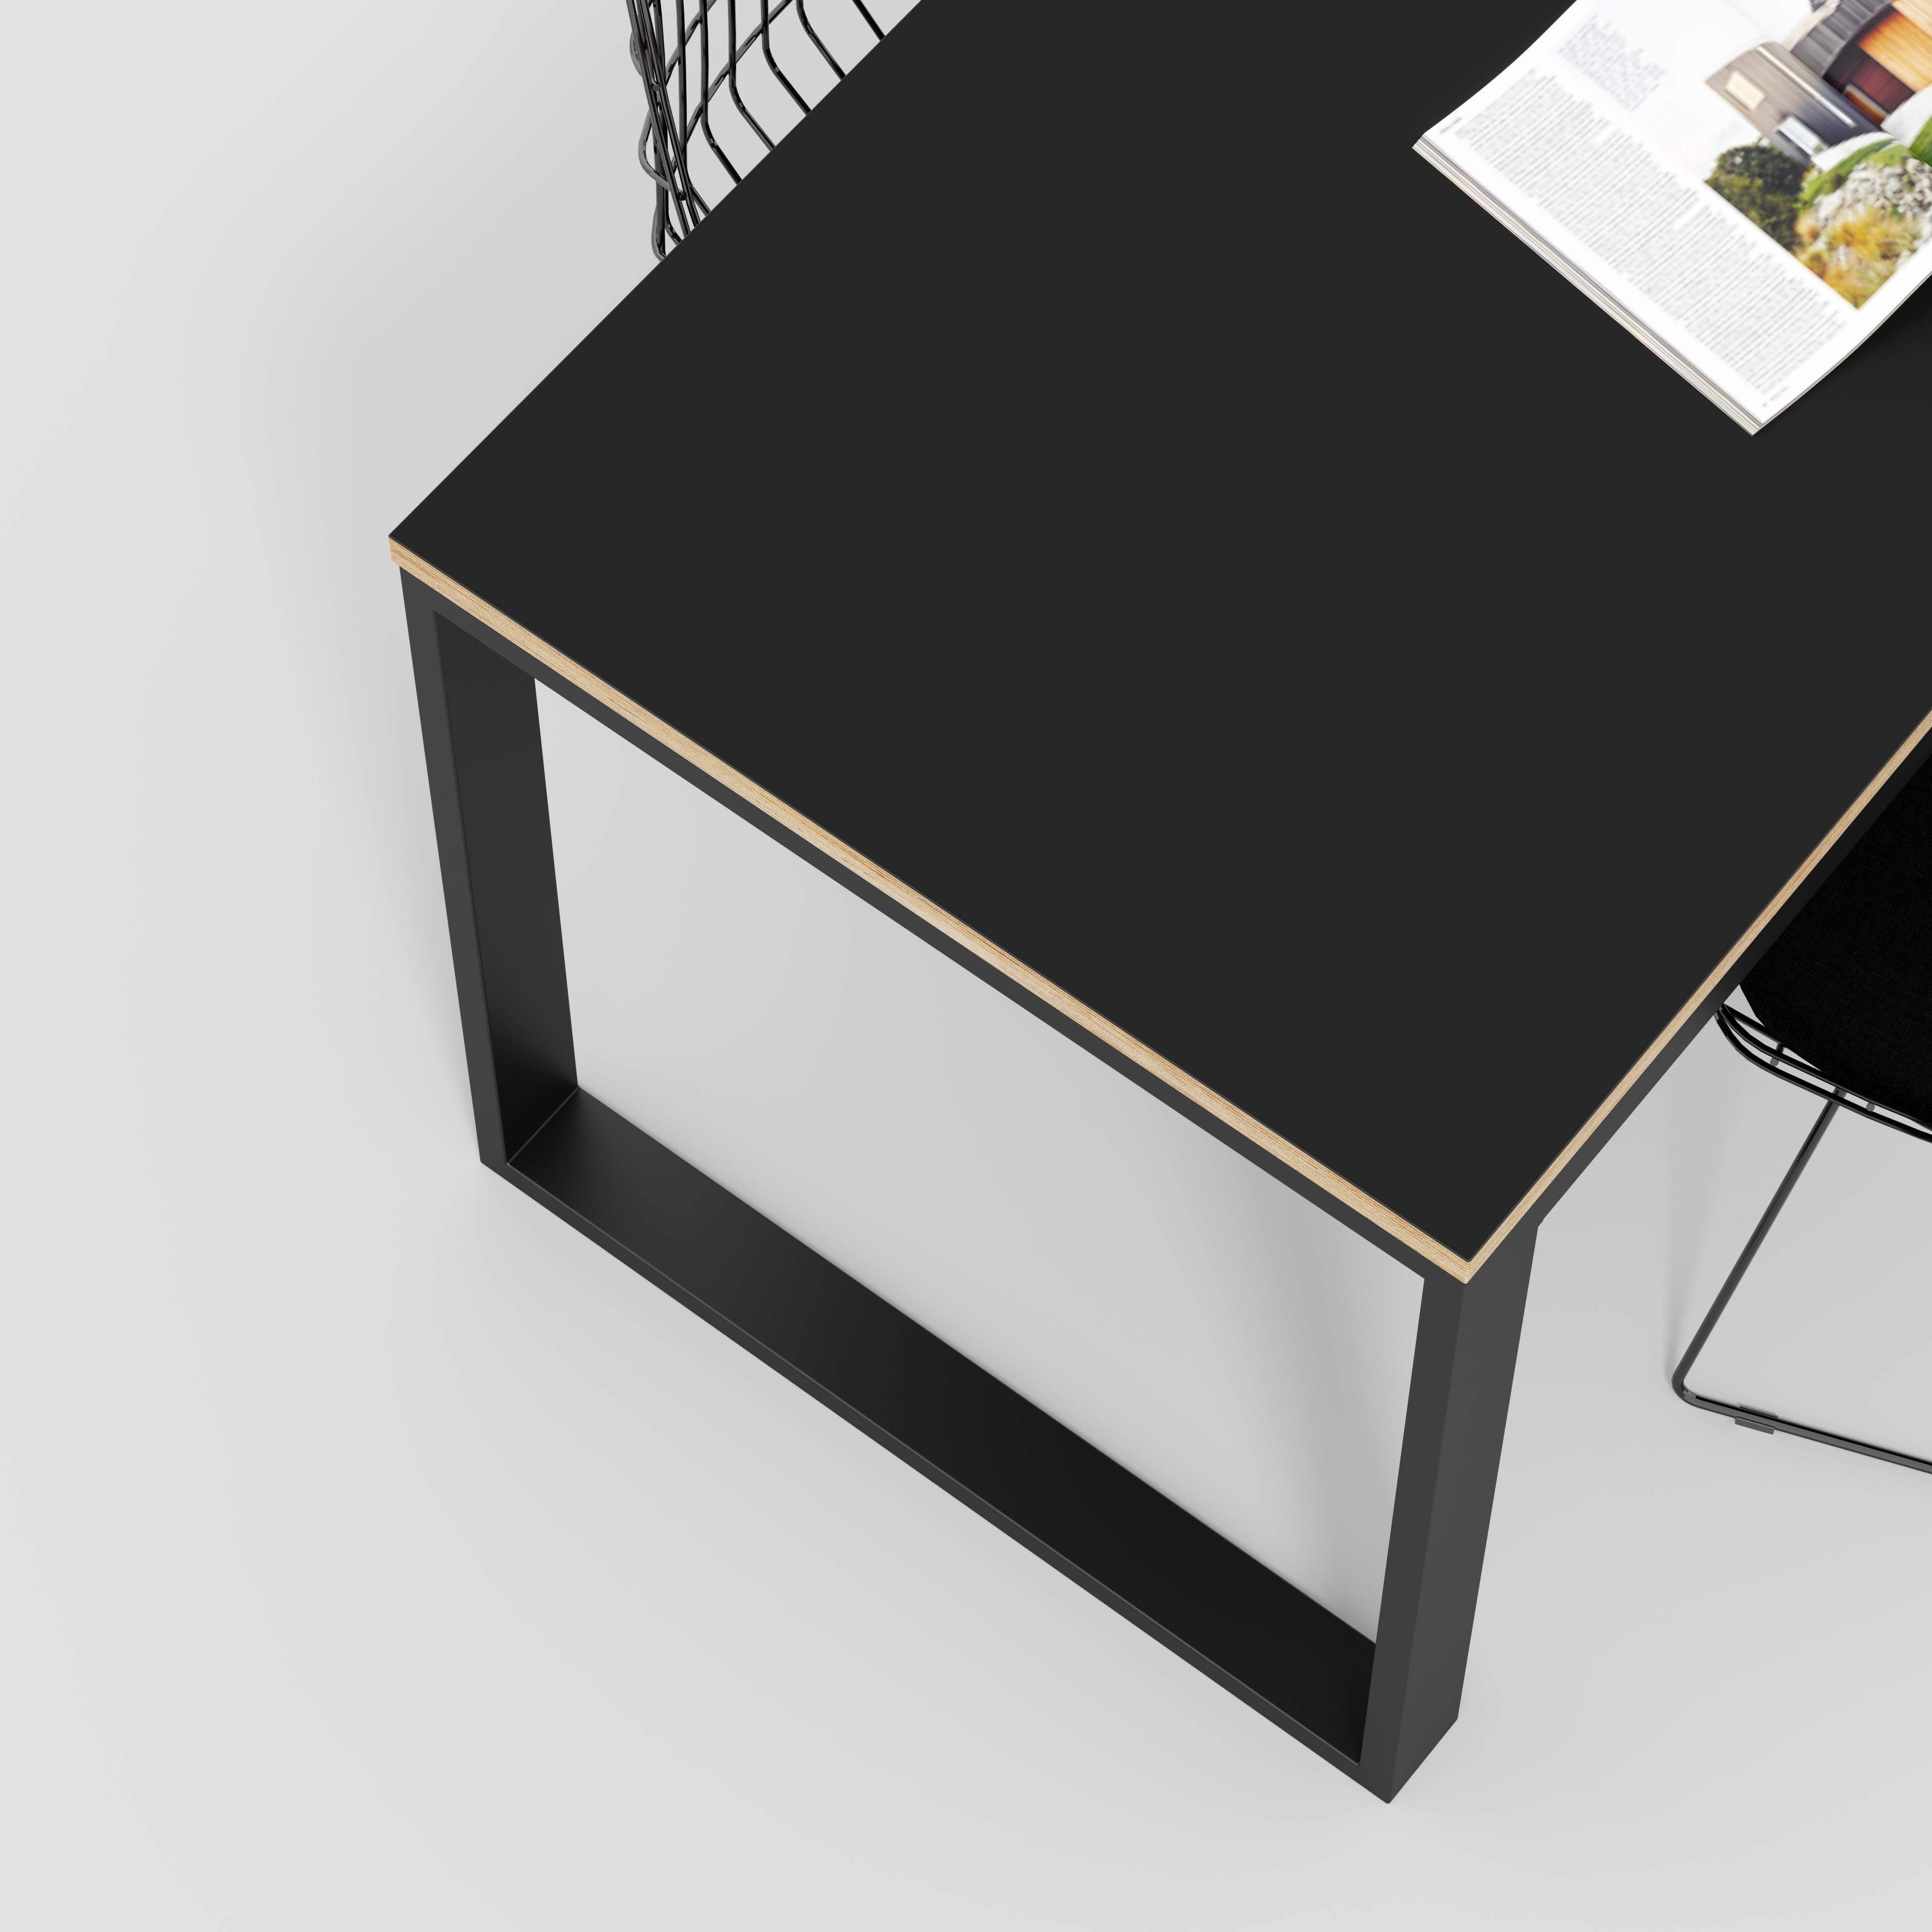 Table with Black Industrial Frame - Formica Diamond Black - 1200(w) x 745(d) x 735(h)